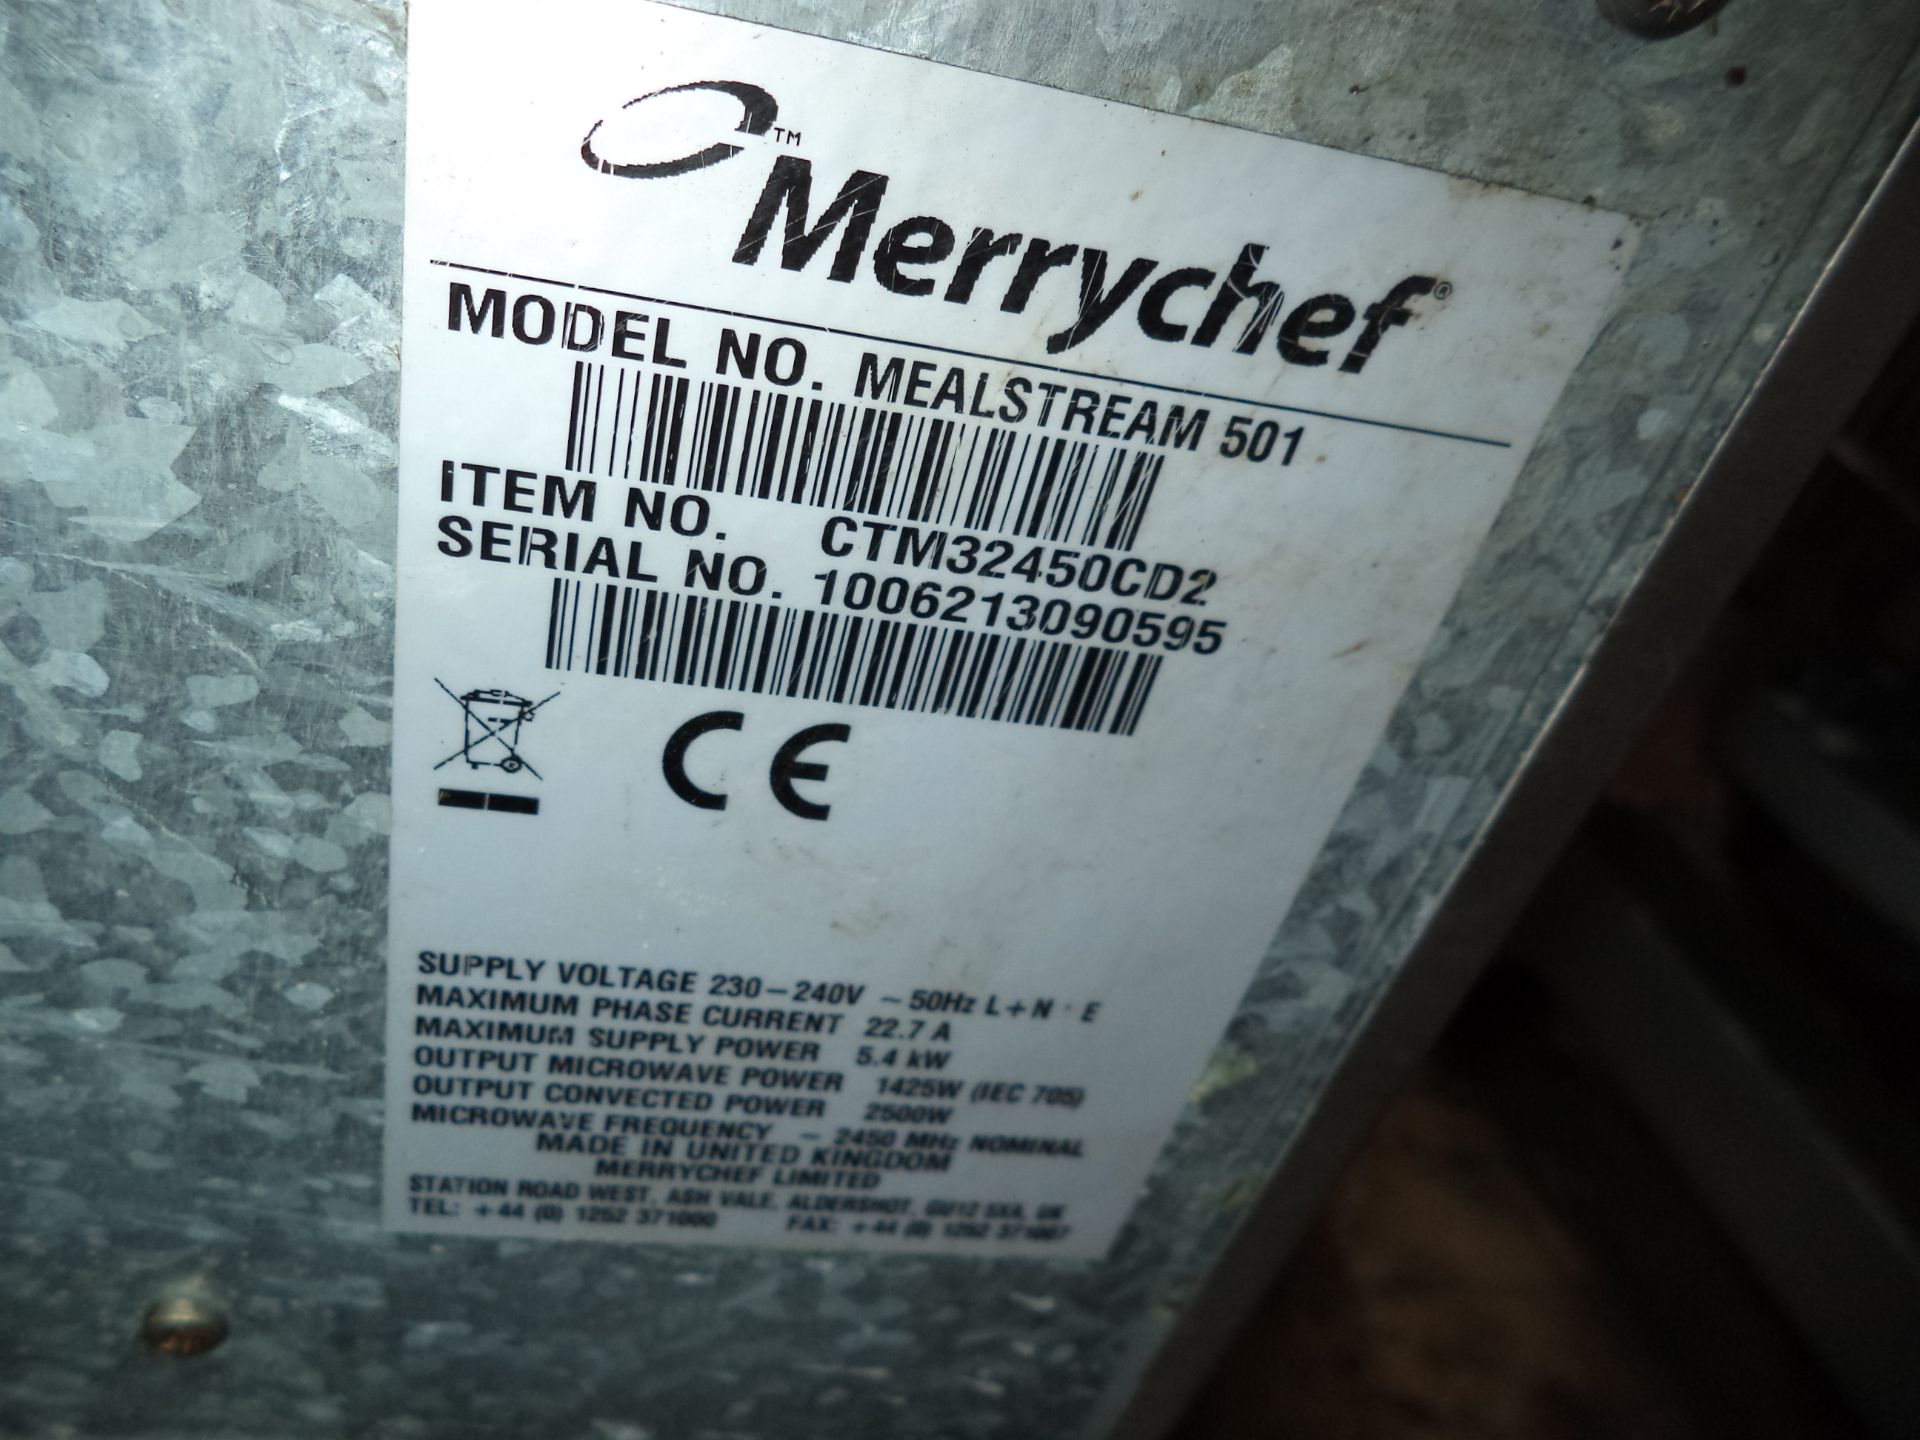 Merrychef Mealstream RD501 multifunction oven IMPORTANT: Please remember goods successfully bid upon - Image 3 of 3